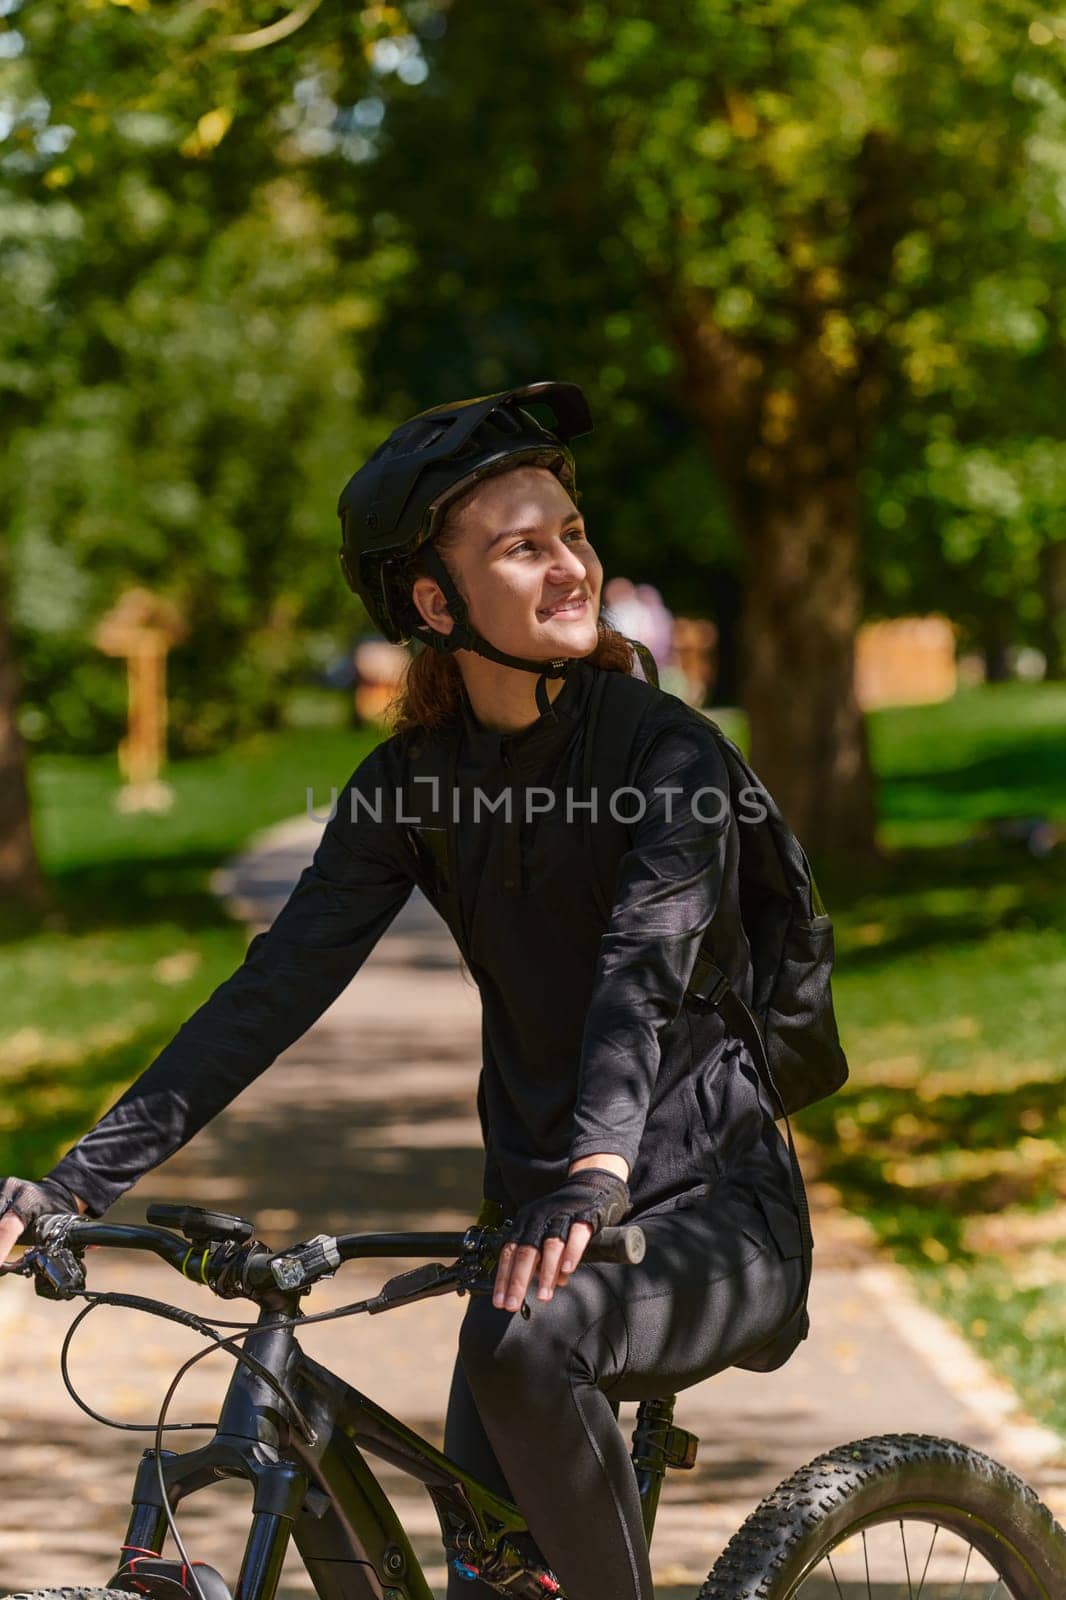 In the radiant embrace of a sunny day, a modern woman revels in the joy of cycling, her sleek bicycle and professional gear complementing her active lifestyle as she rides through the park, epitomizing a perfect blend of style and outdoor vitality.